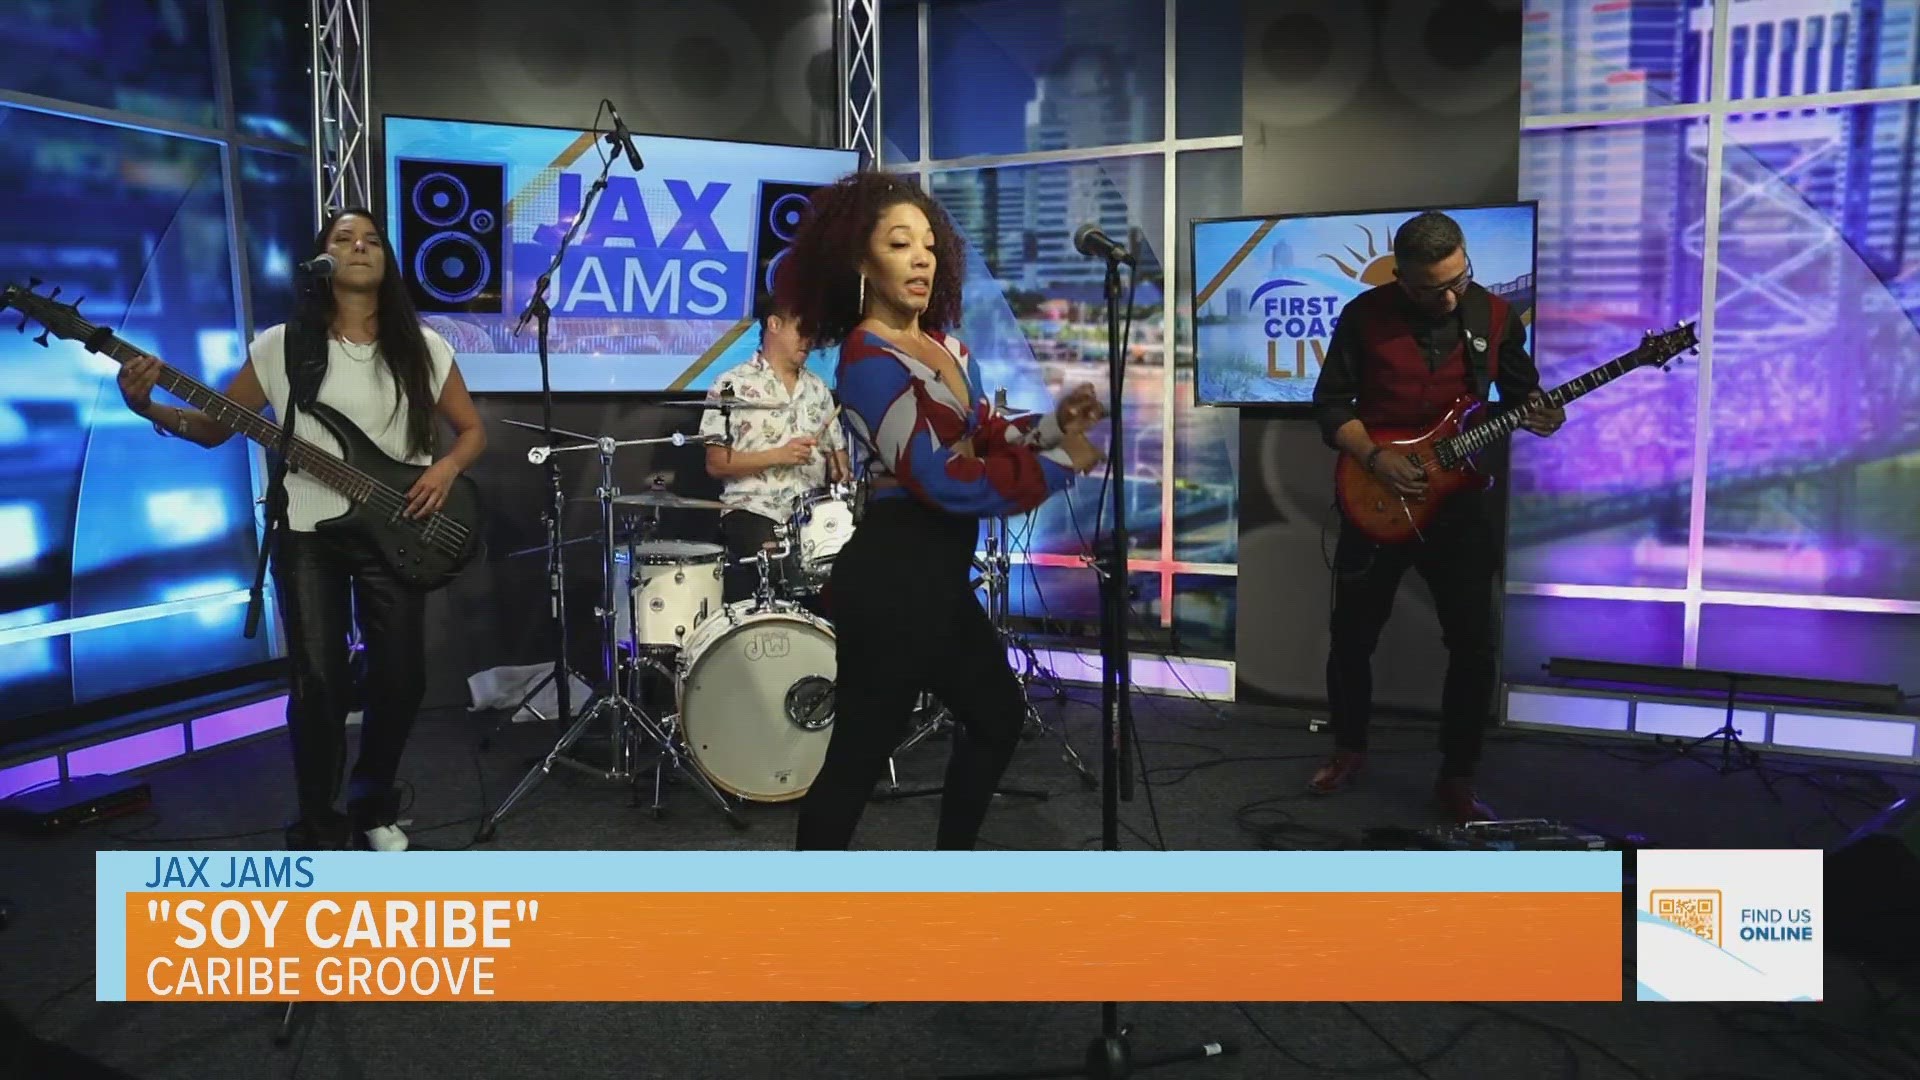 Caribe Groove performs 'Soy Caribe'